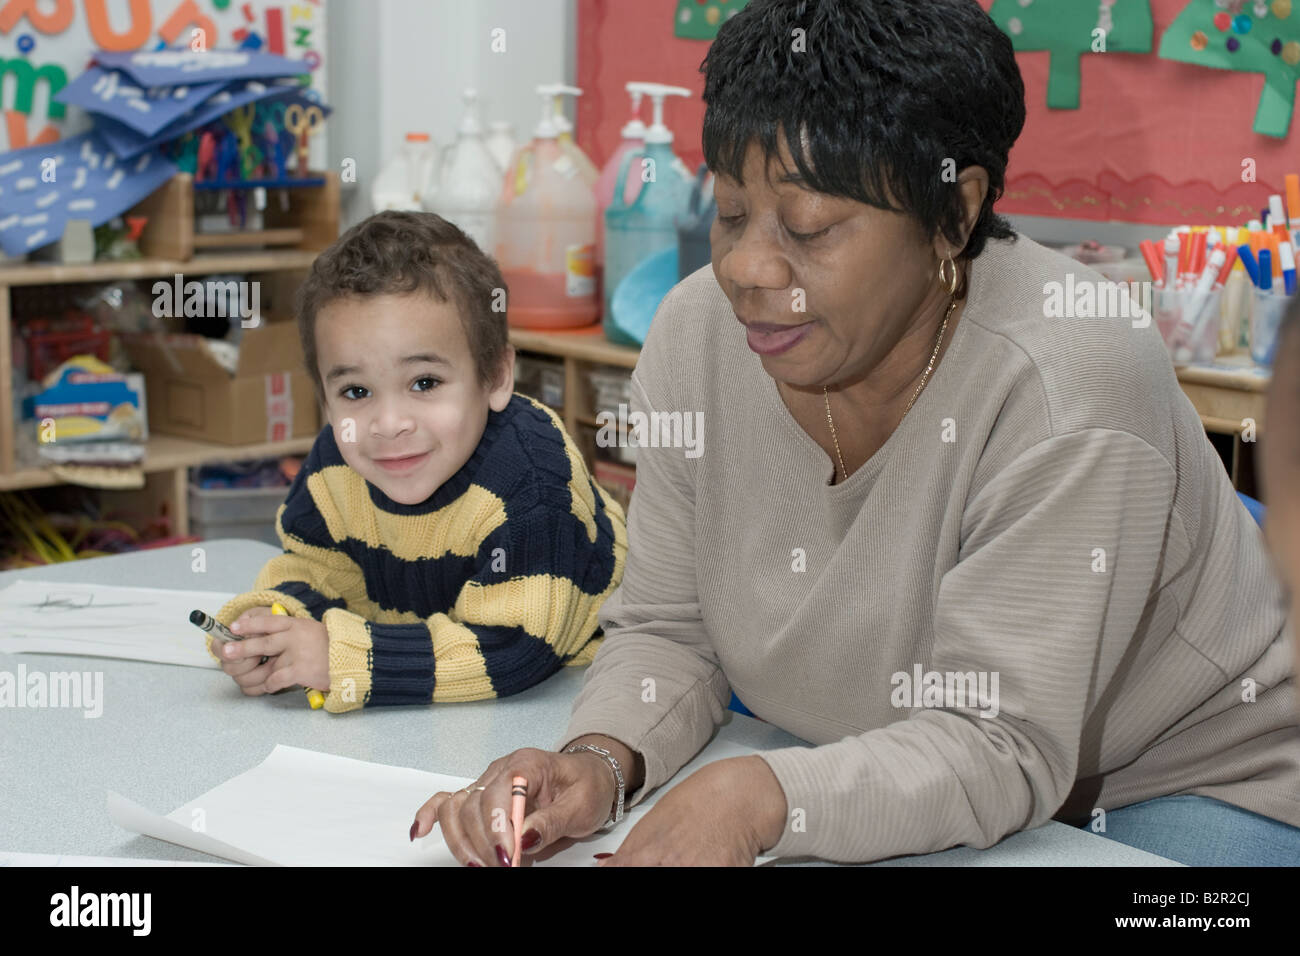 African American preschool teacher helping one of her students to color Stock Photo